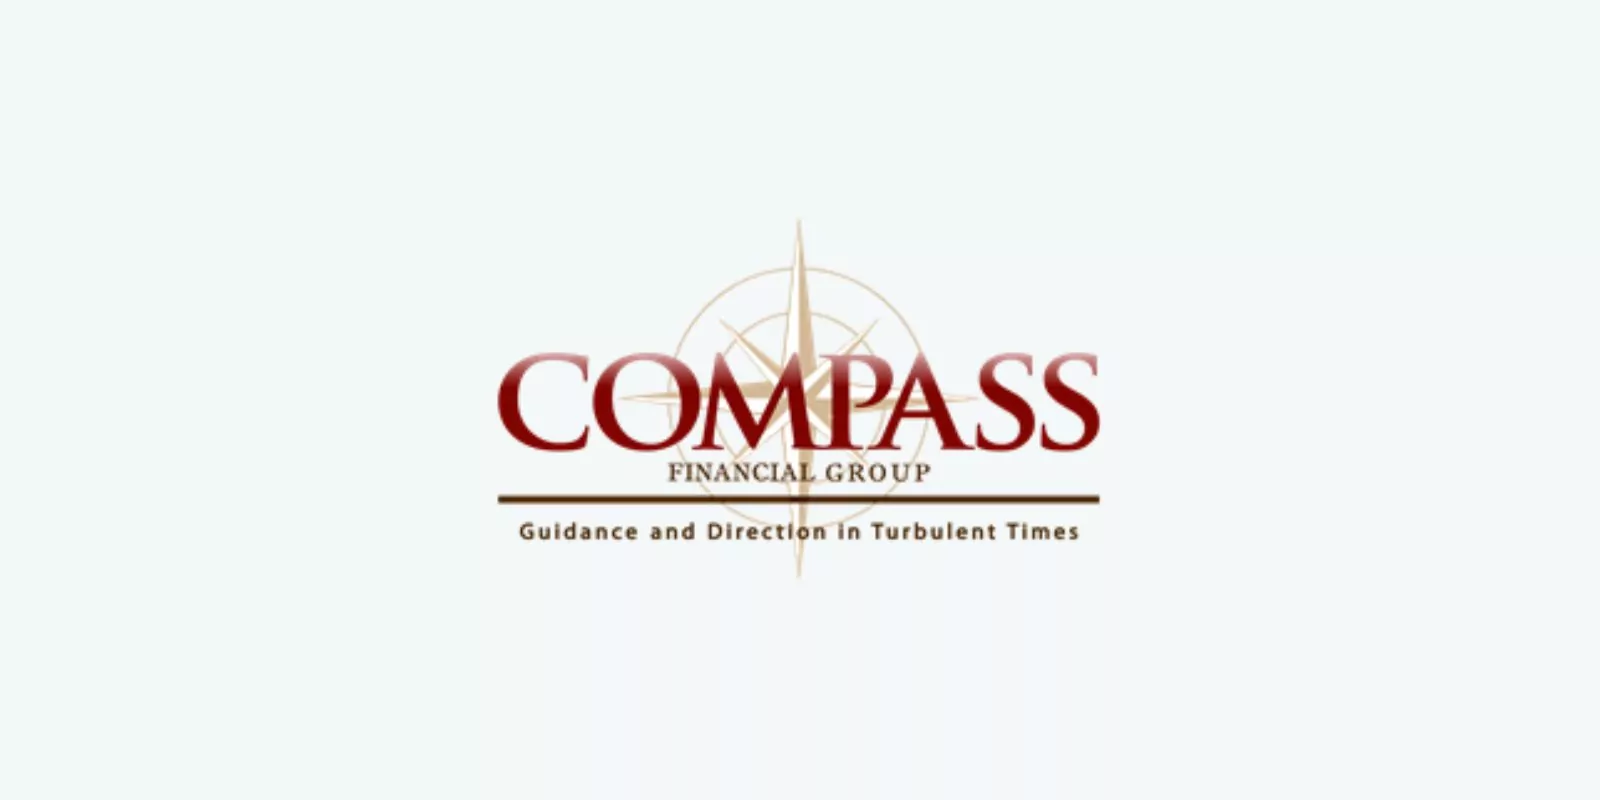 Compass Financial Group